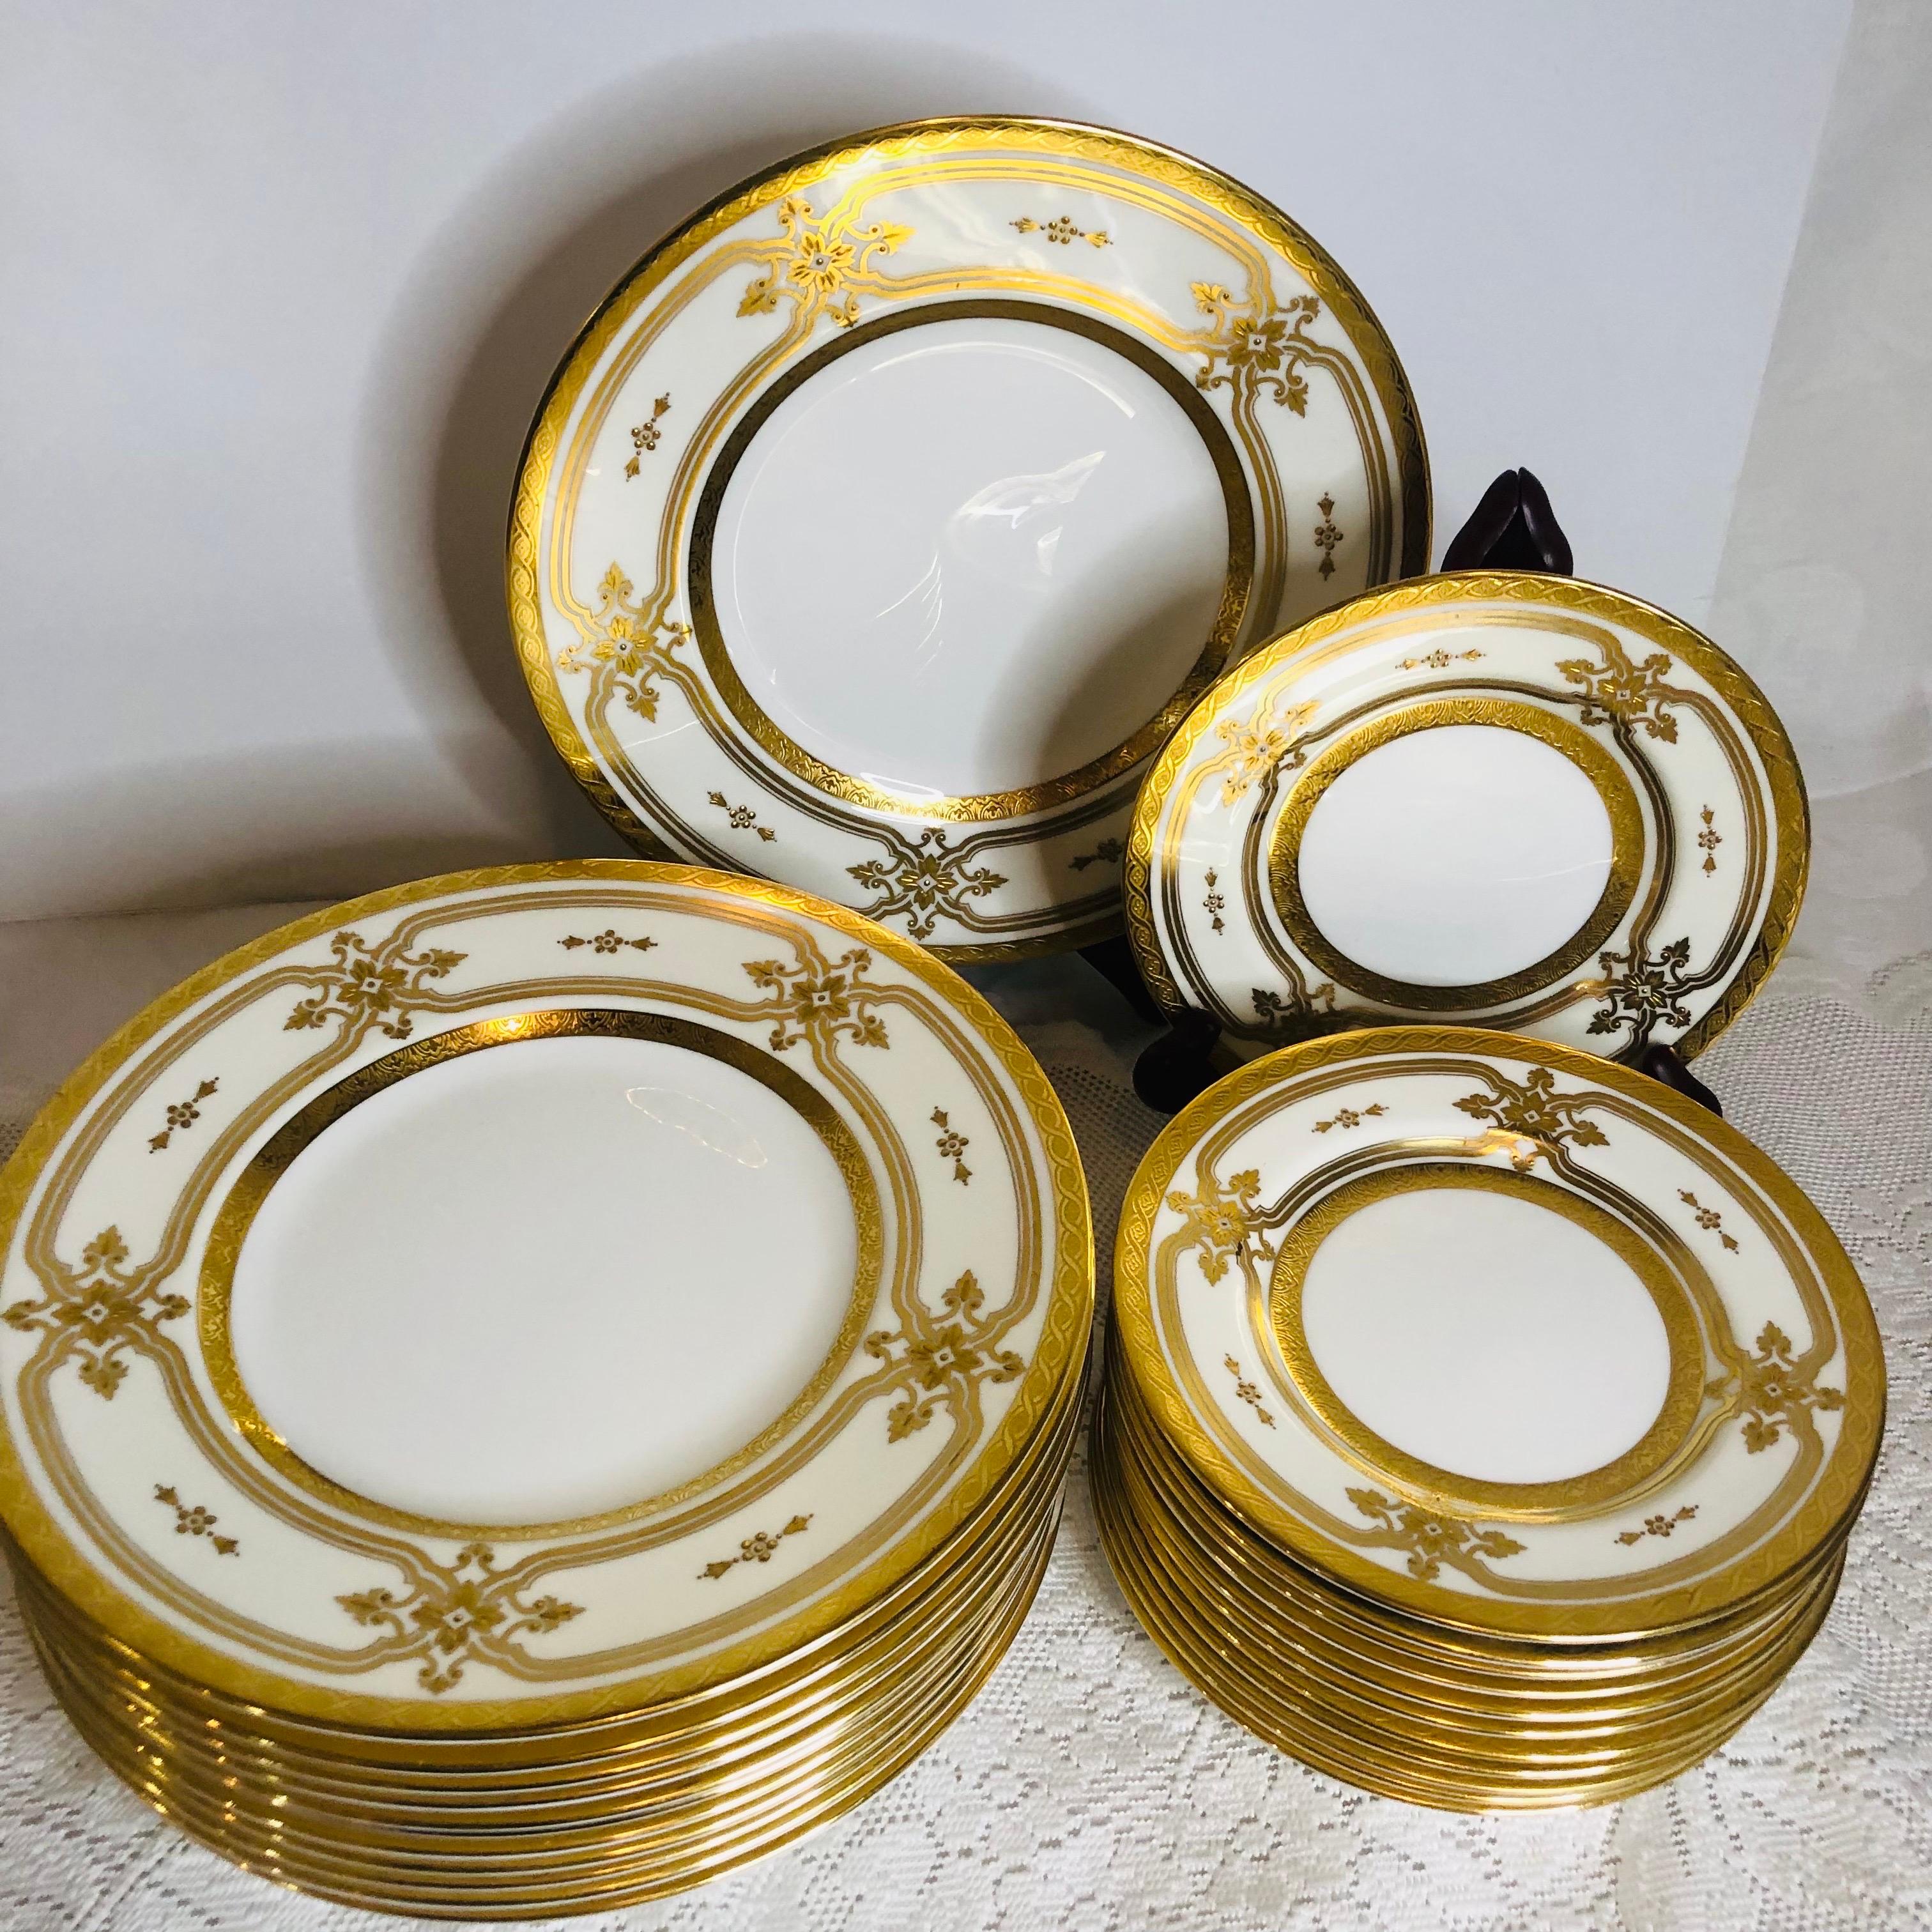 Rococo Set of Minton Made for Tiffany & Co. Plates with 12 Luncheon and 12 Bread Plates